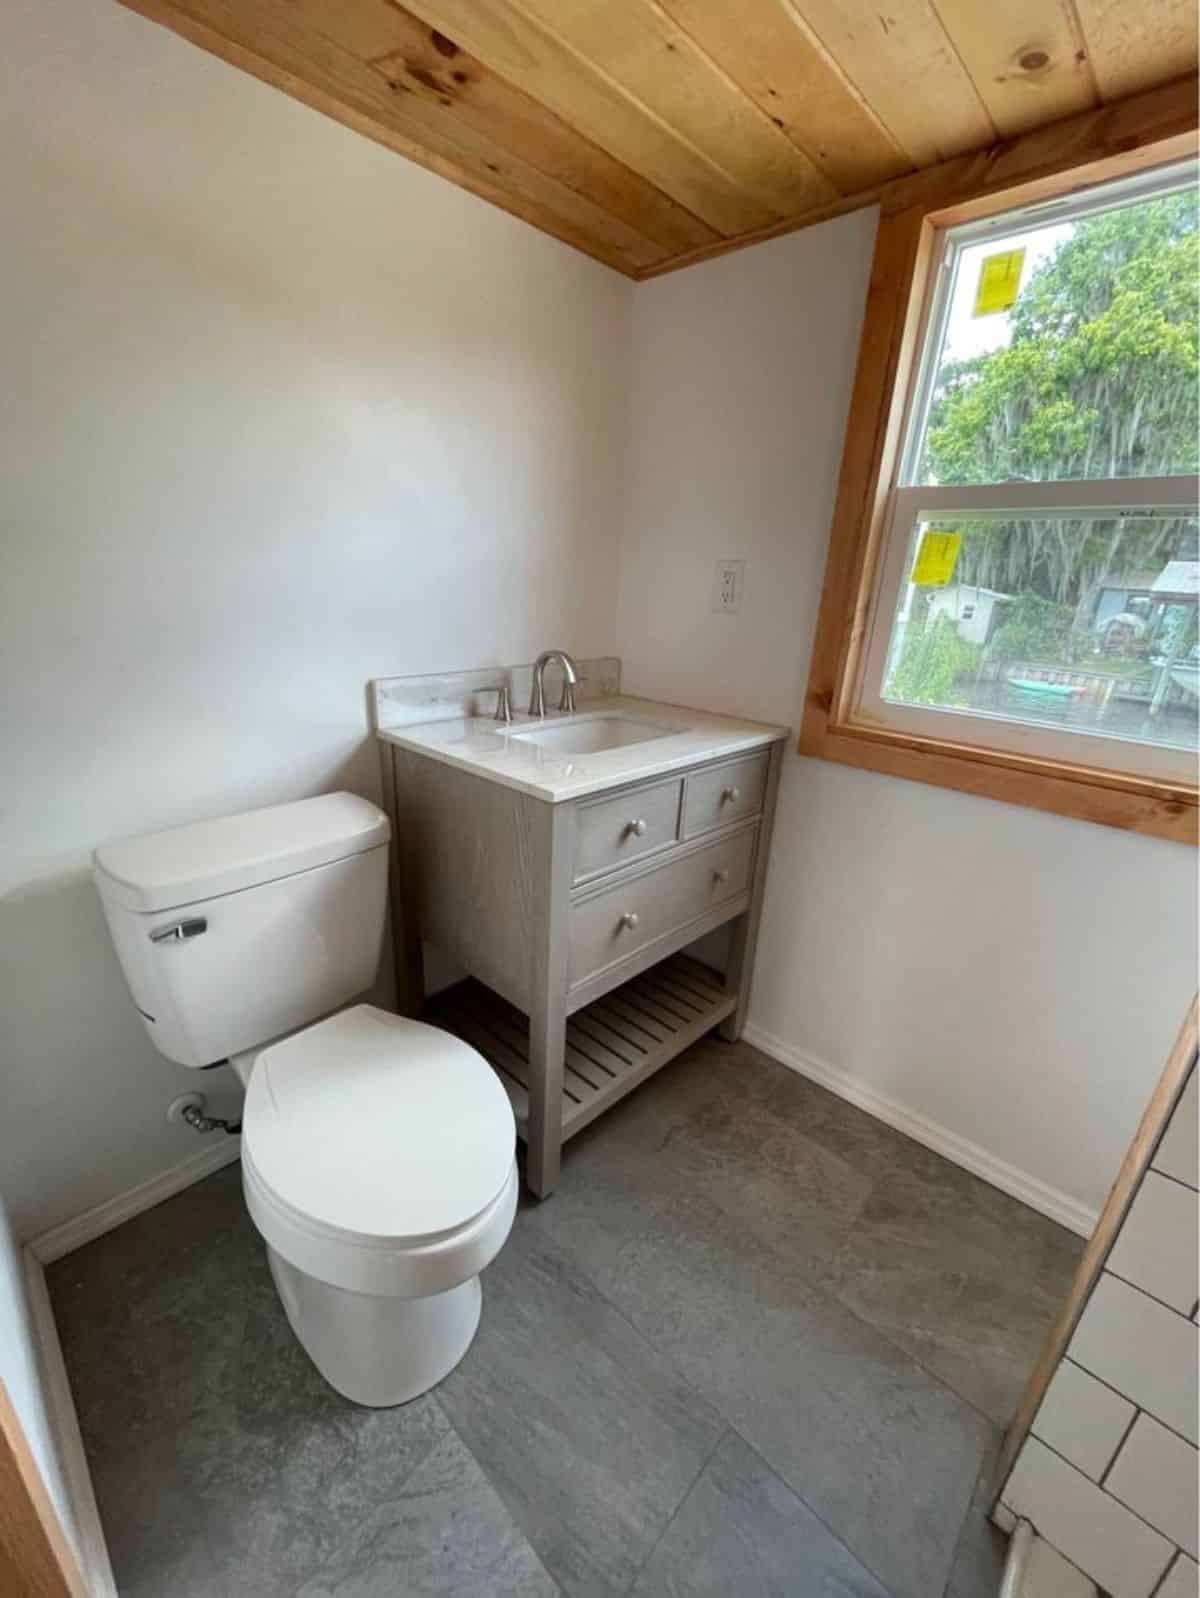 Sink with vanity and standard toilet in bathroom of 20' Towable Tiny Home